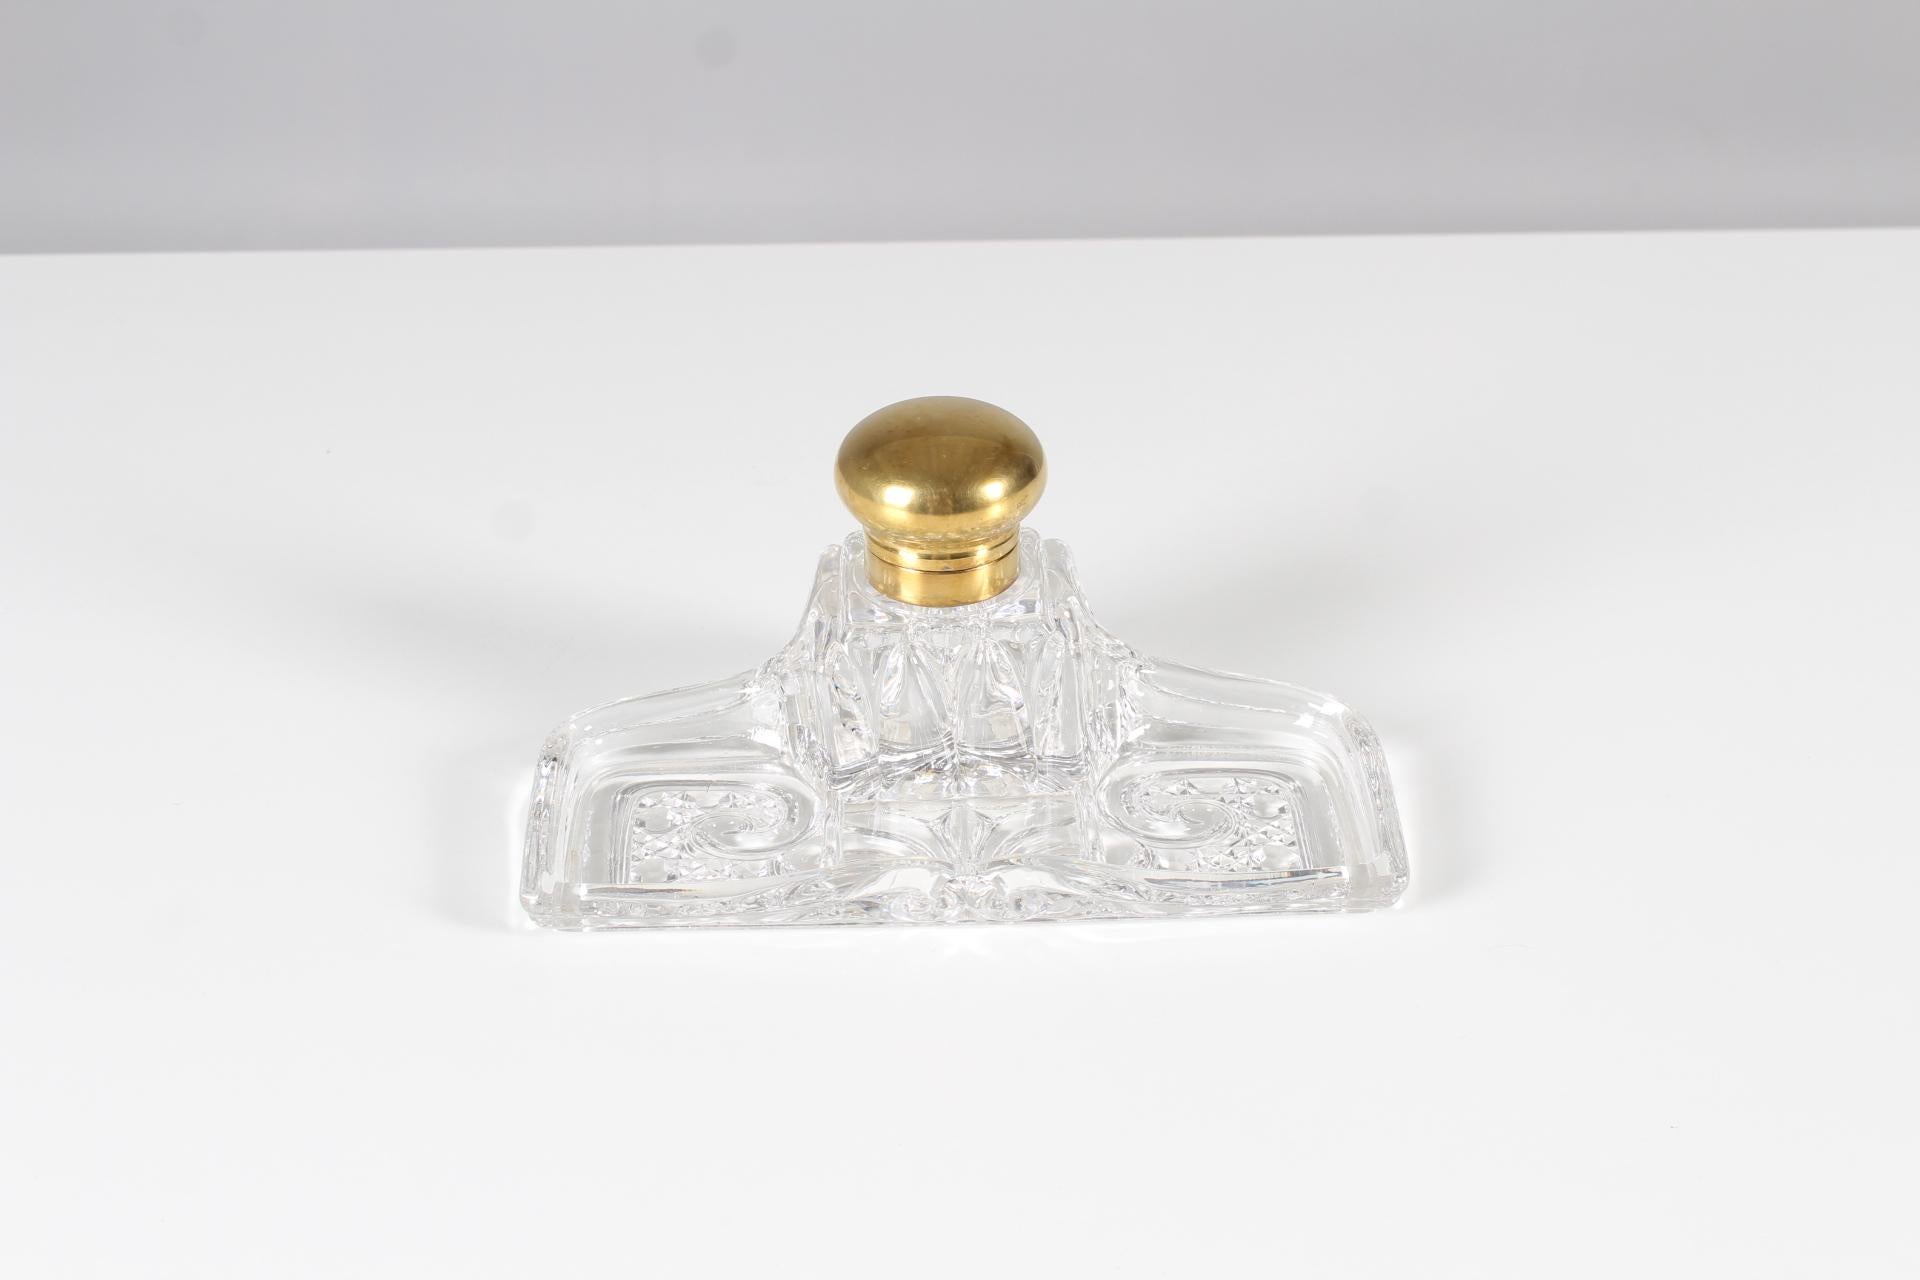 Exceptional inkwell with pen tray made of BACCARAT crystal. The rectangular pen tray has a cube-shaped inkwell holder in the center, closed with a gilded brass hinge. There is a relief mark BACCARAT DEPOSE on the inside.

Baccarat is a French city